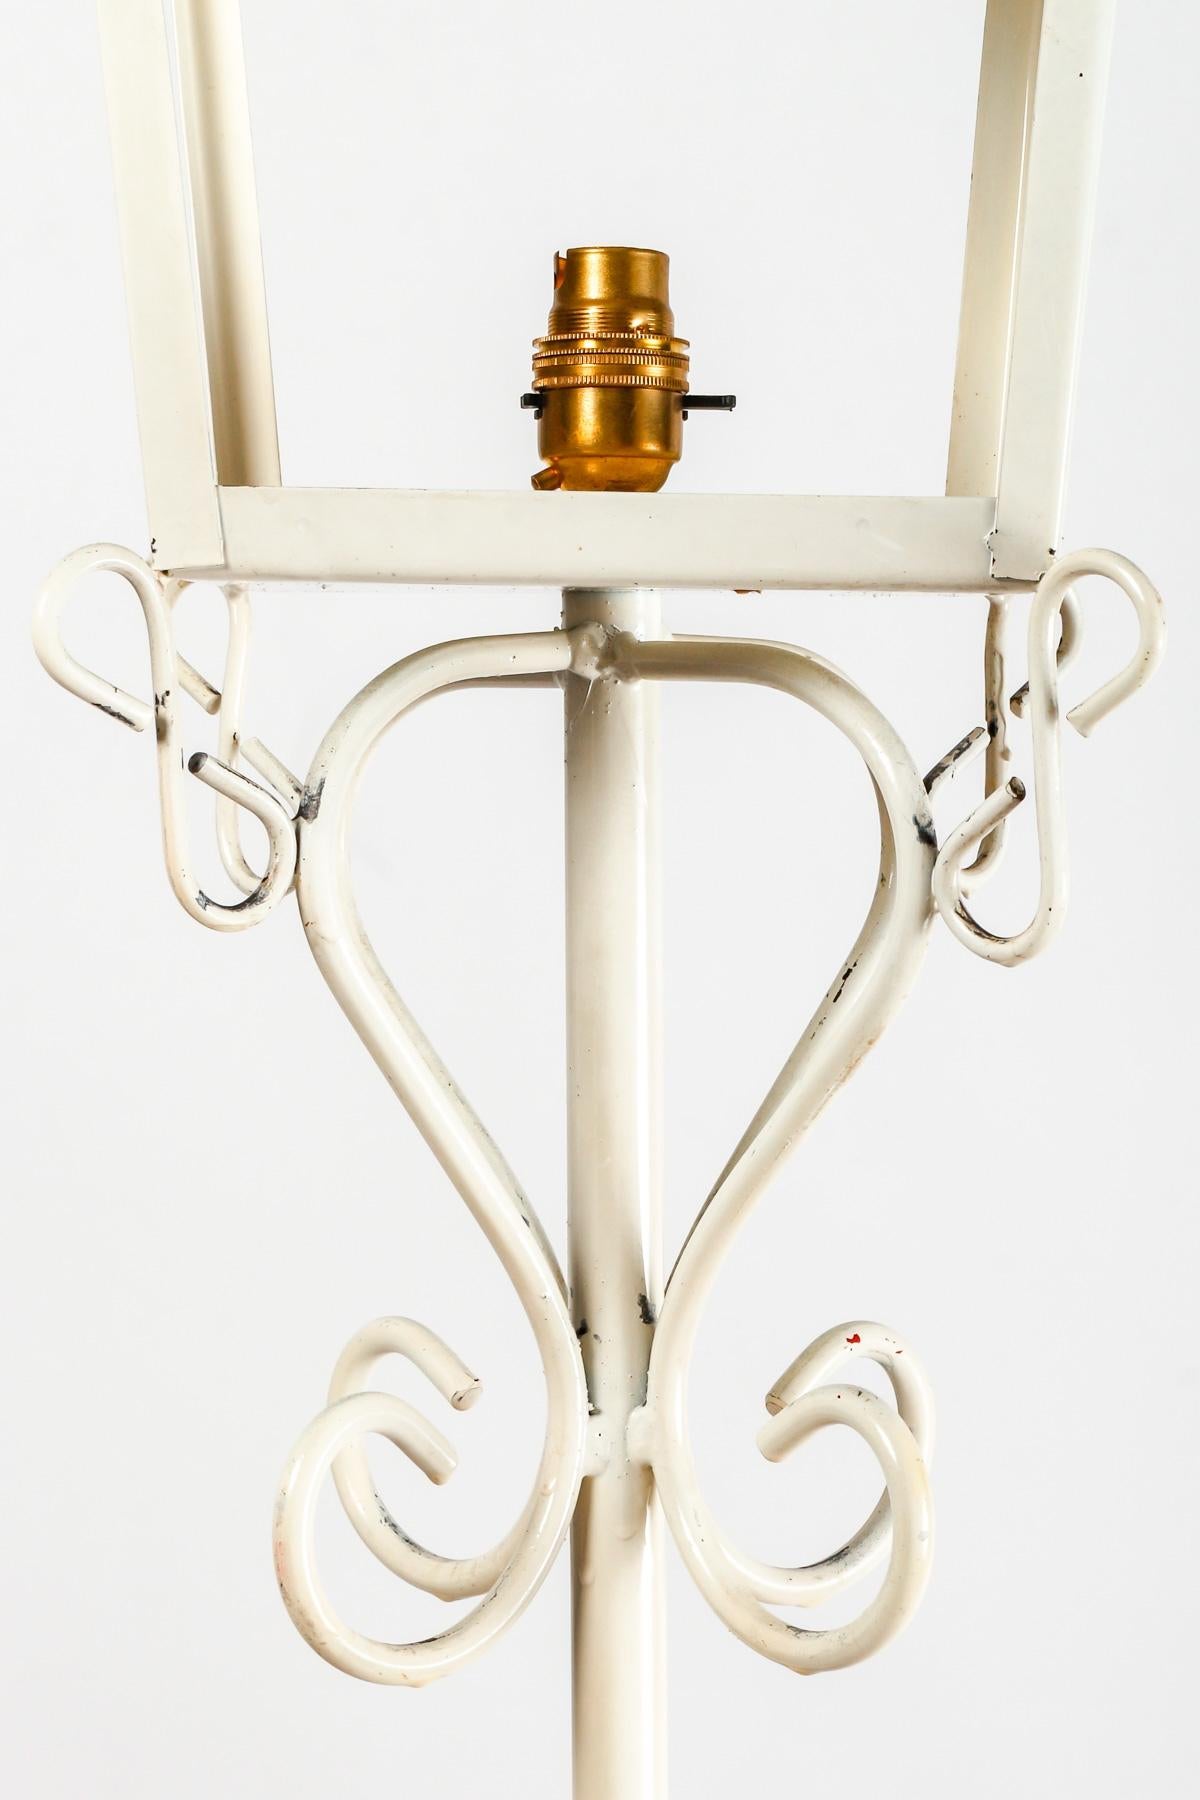 20th Century Floor lamp in Painted Wrought Iron by Maison R.Gleizes, 1950-1960 Design. For Sale